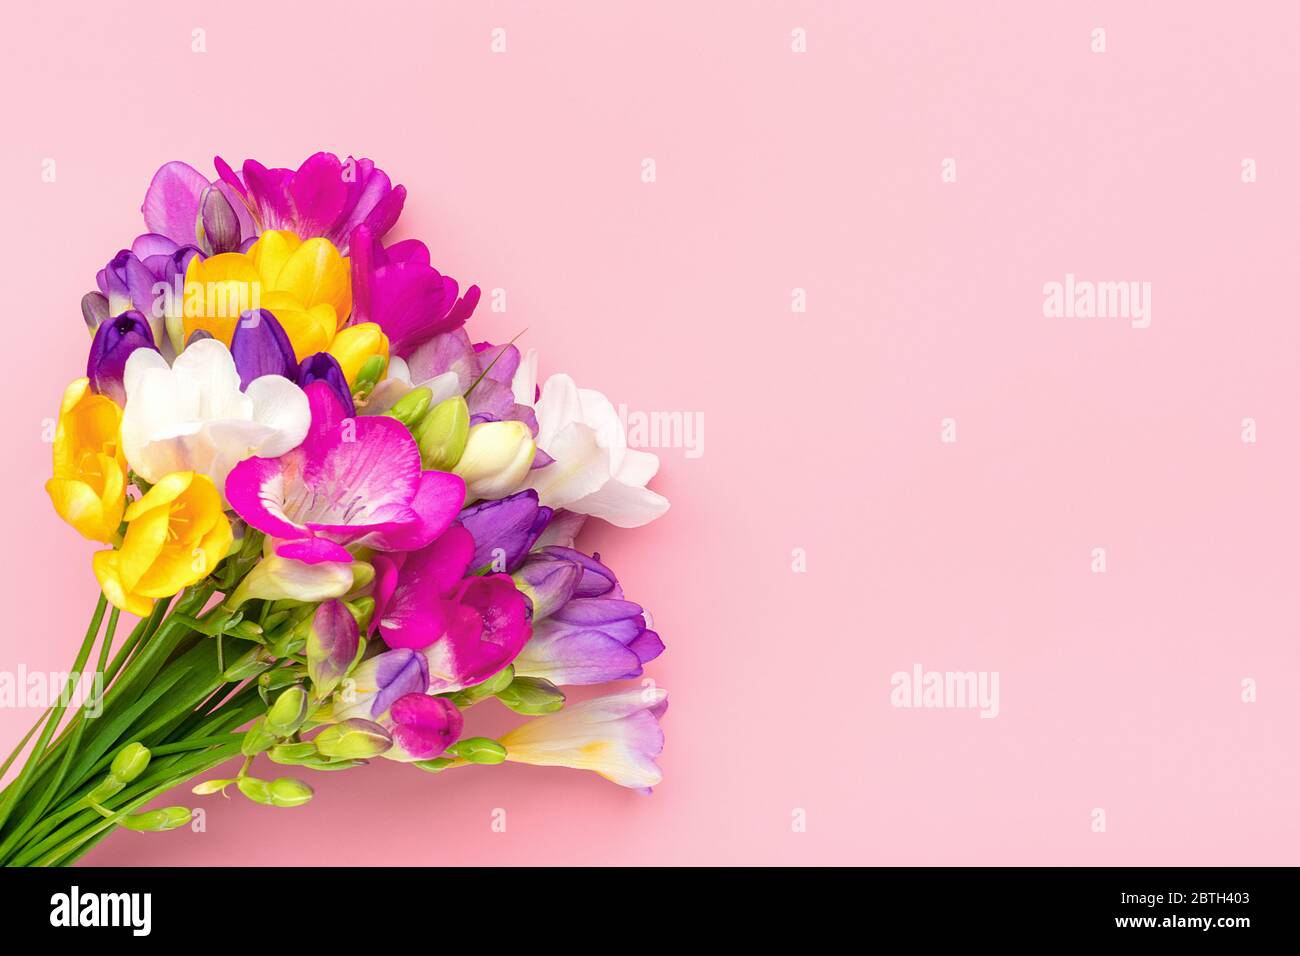 Bouquet of sprig freesia flowers isolated on pink background Floral holiday card Top view Flat lay Stock Photo